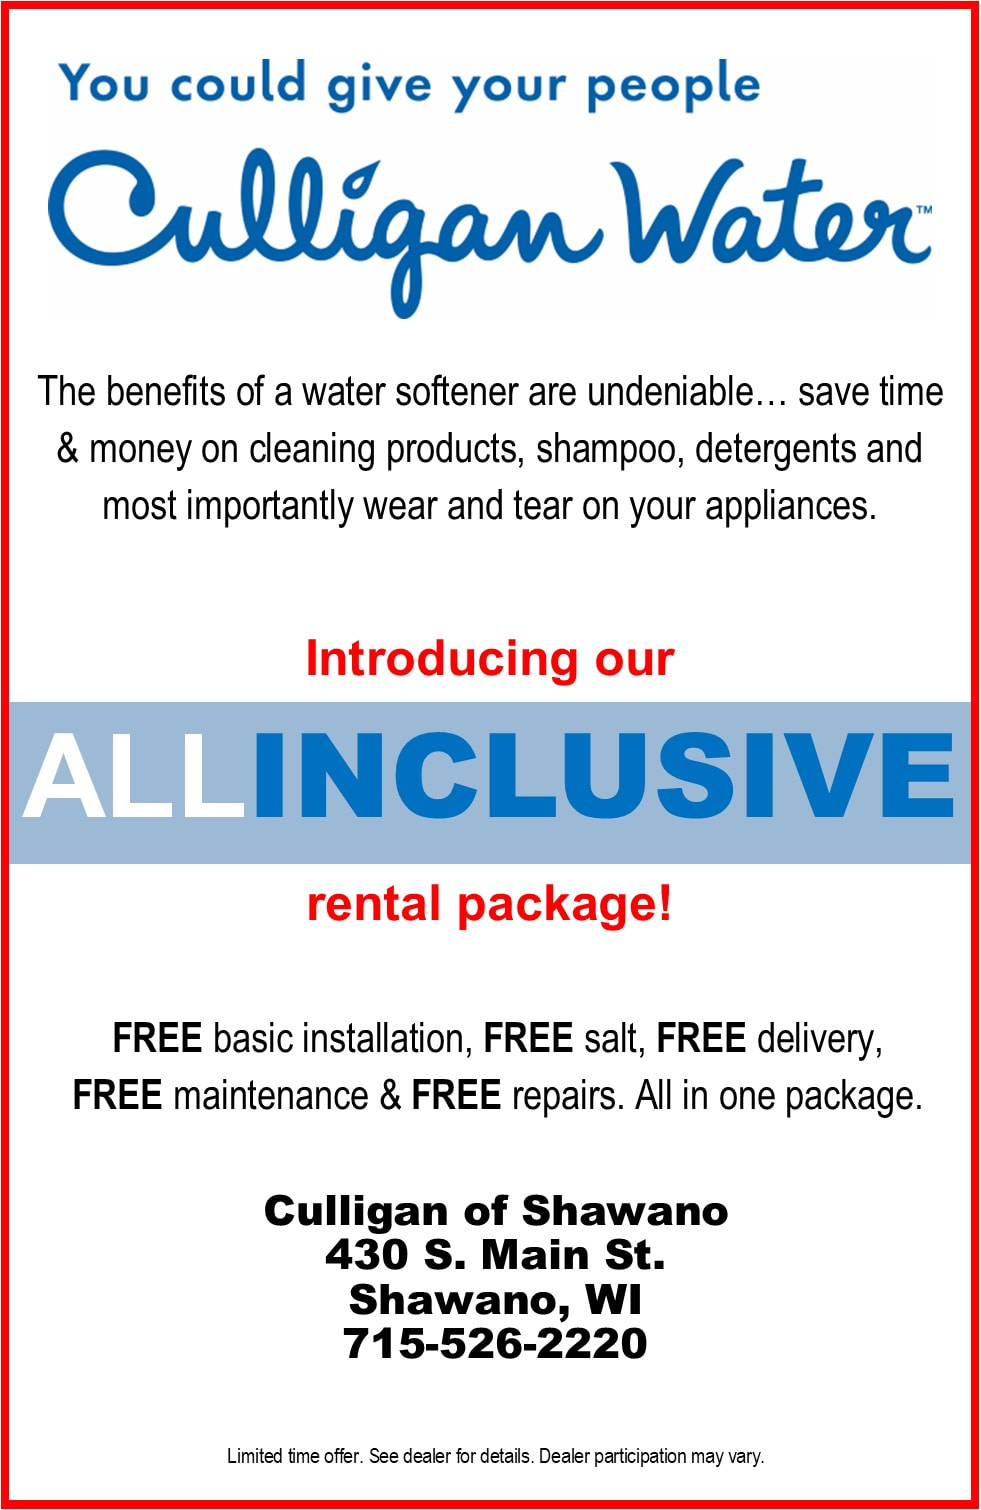 Culligan of Shawano Bottled Water Delivery Service - Culligan of Shawano  715-526-2220